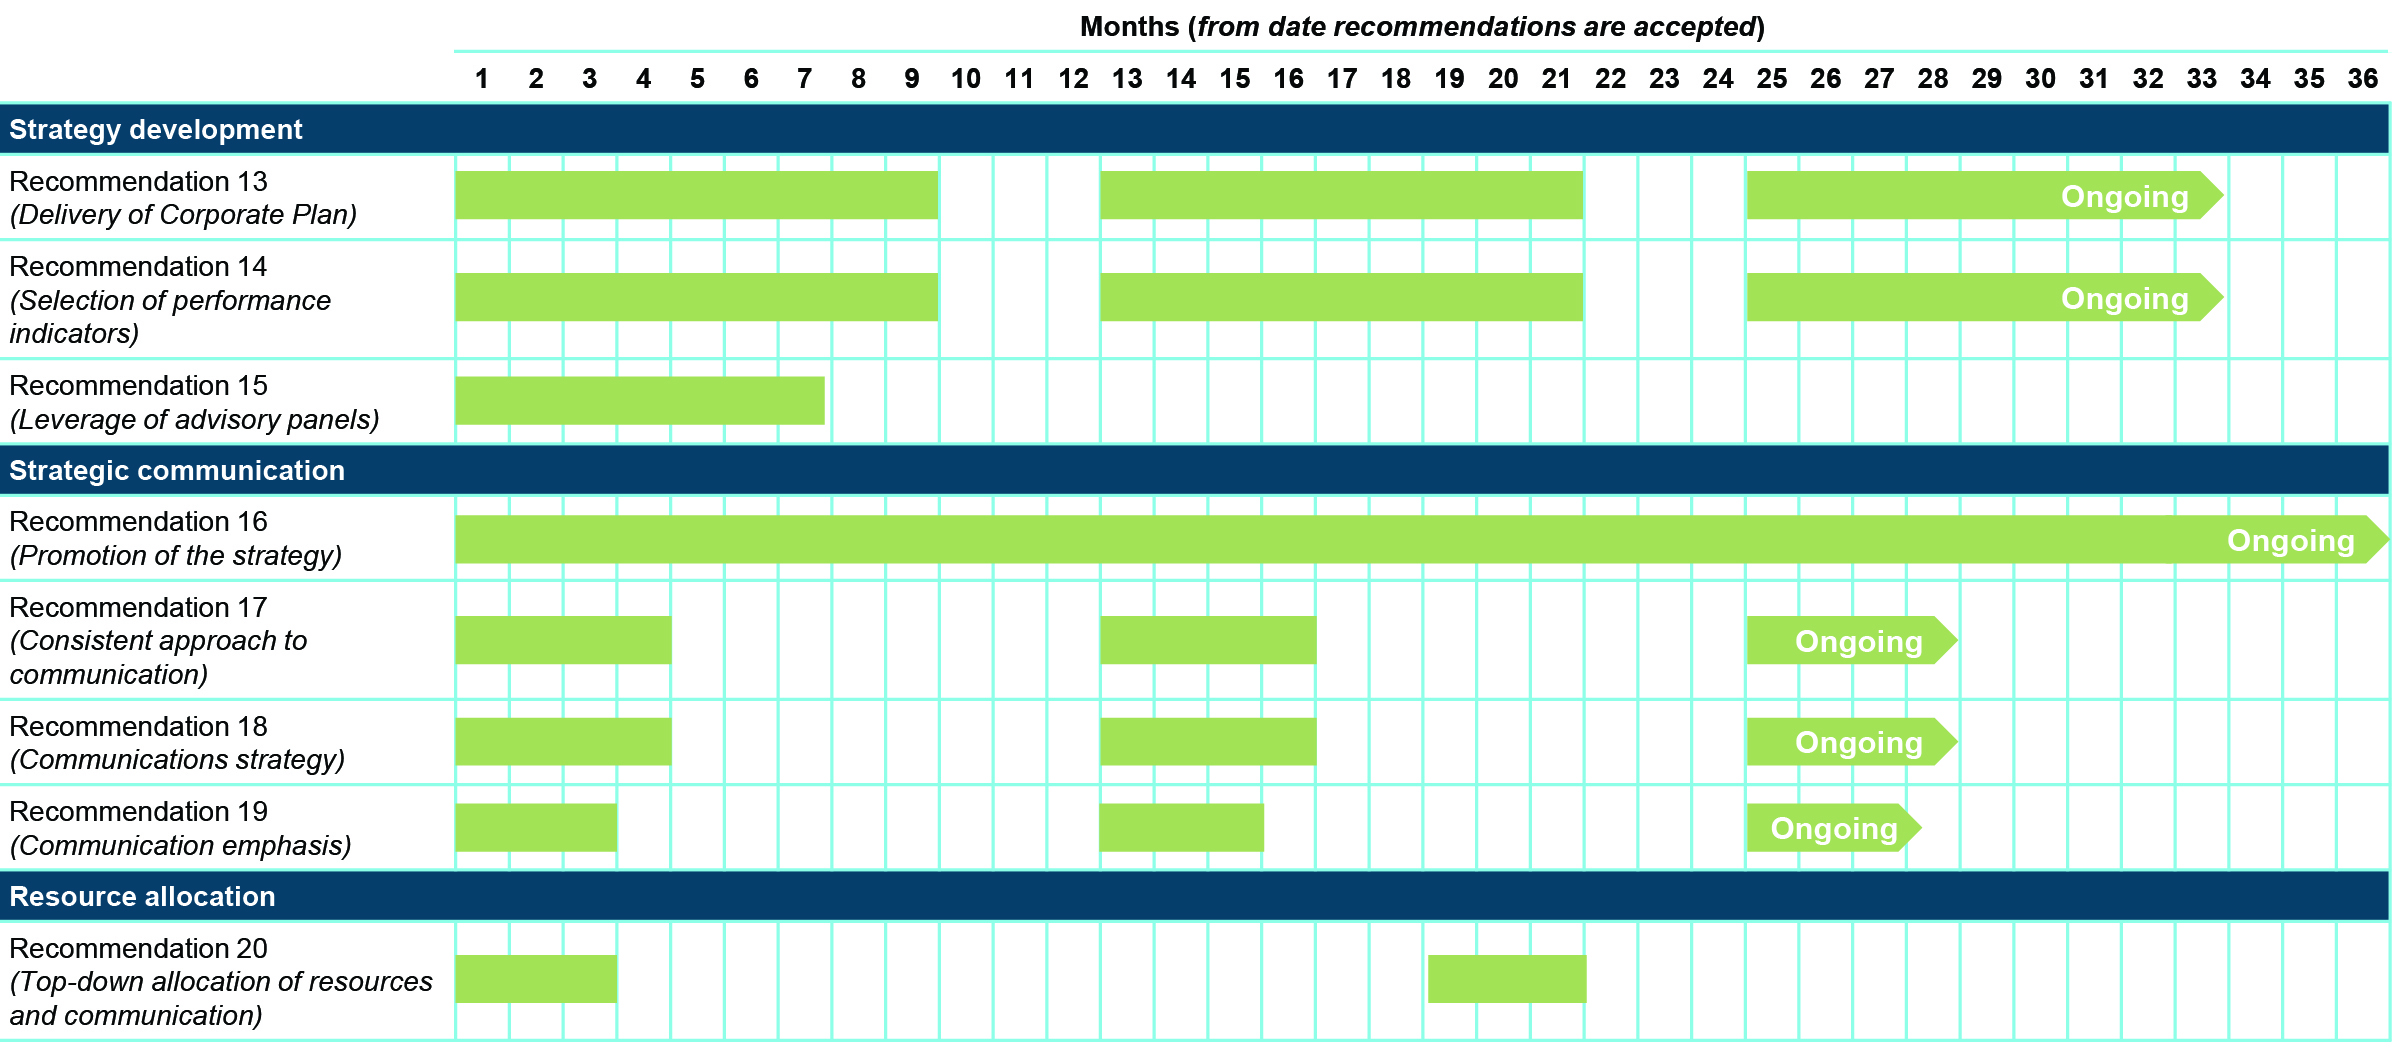 Figure 33: Strategy — proposed implementation timelines